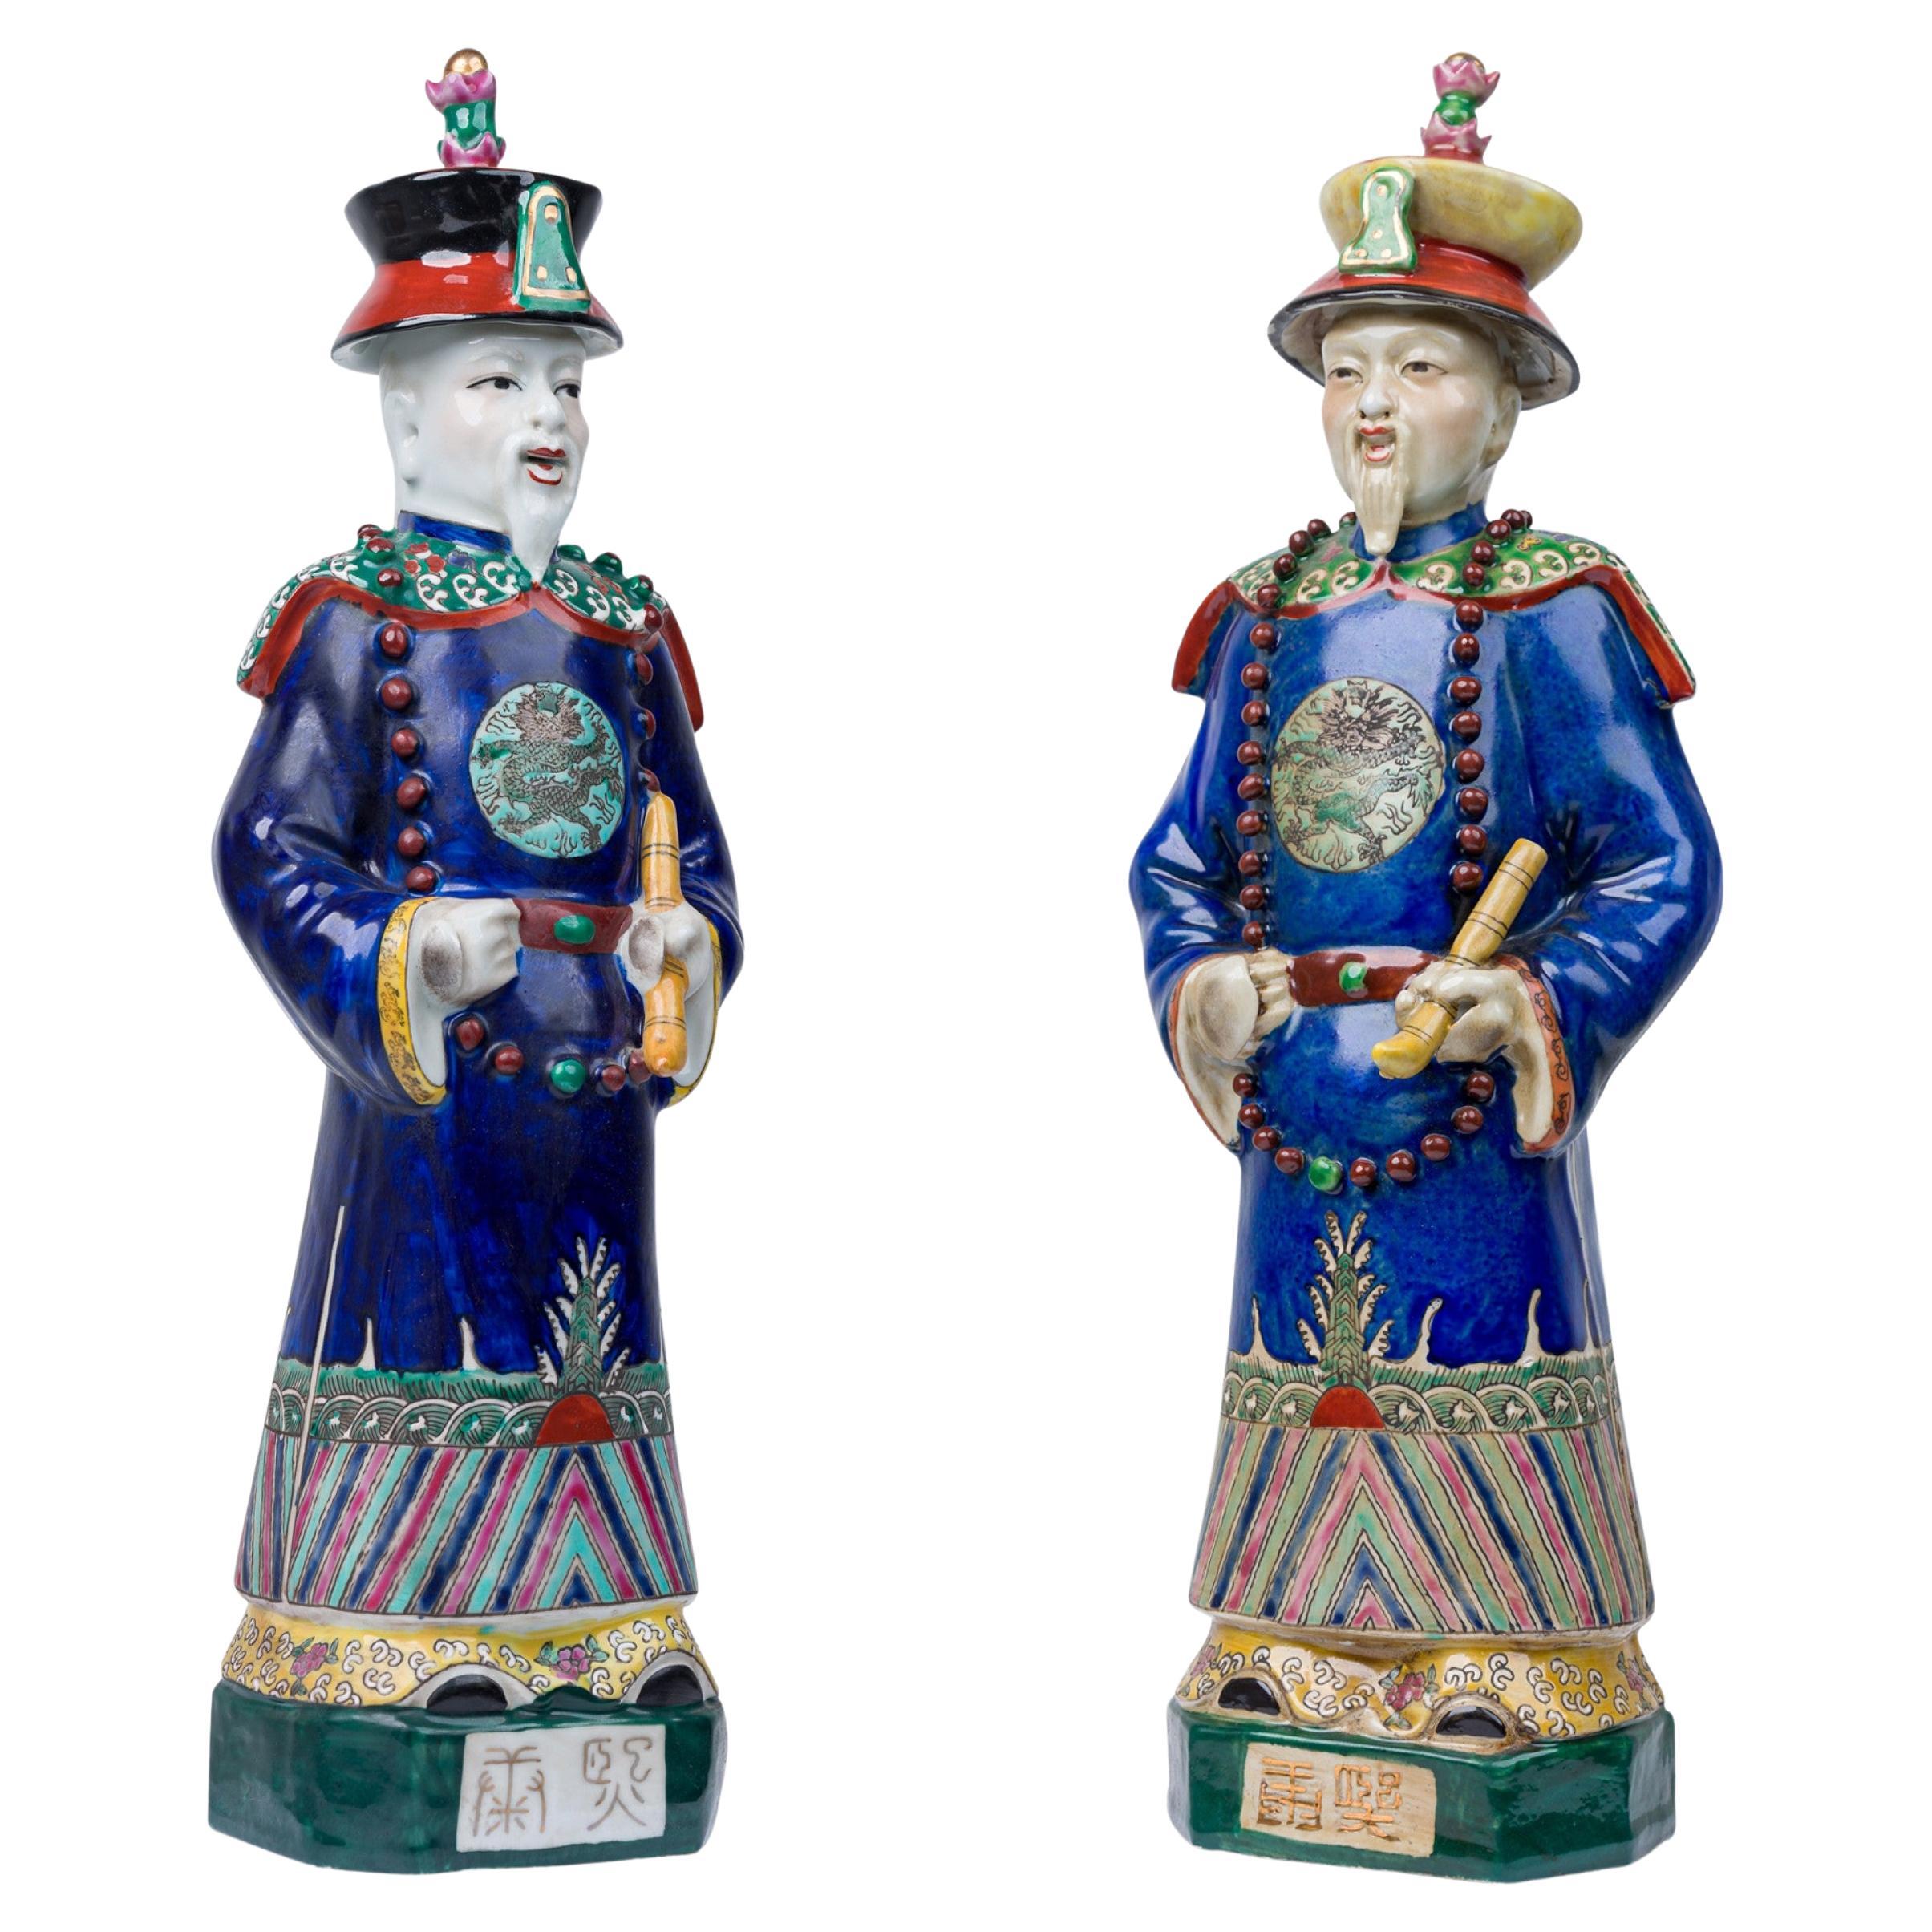 Pair of Chinese Painted Ceramic Figures Depicting a Blue Robed Emperor For Sale